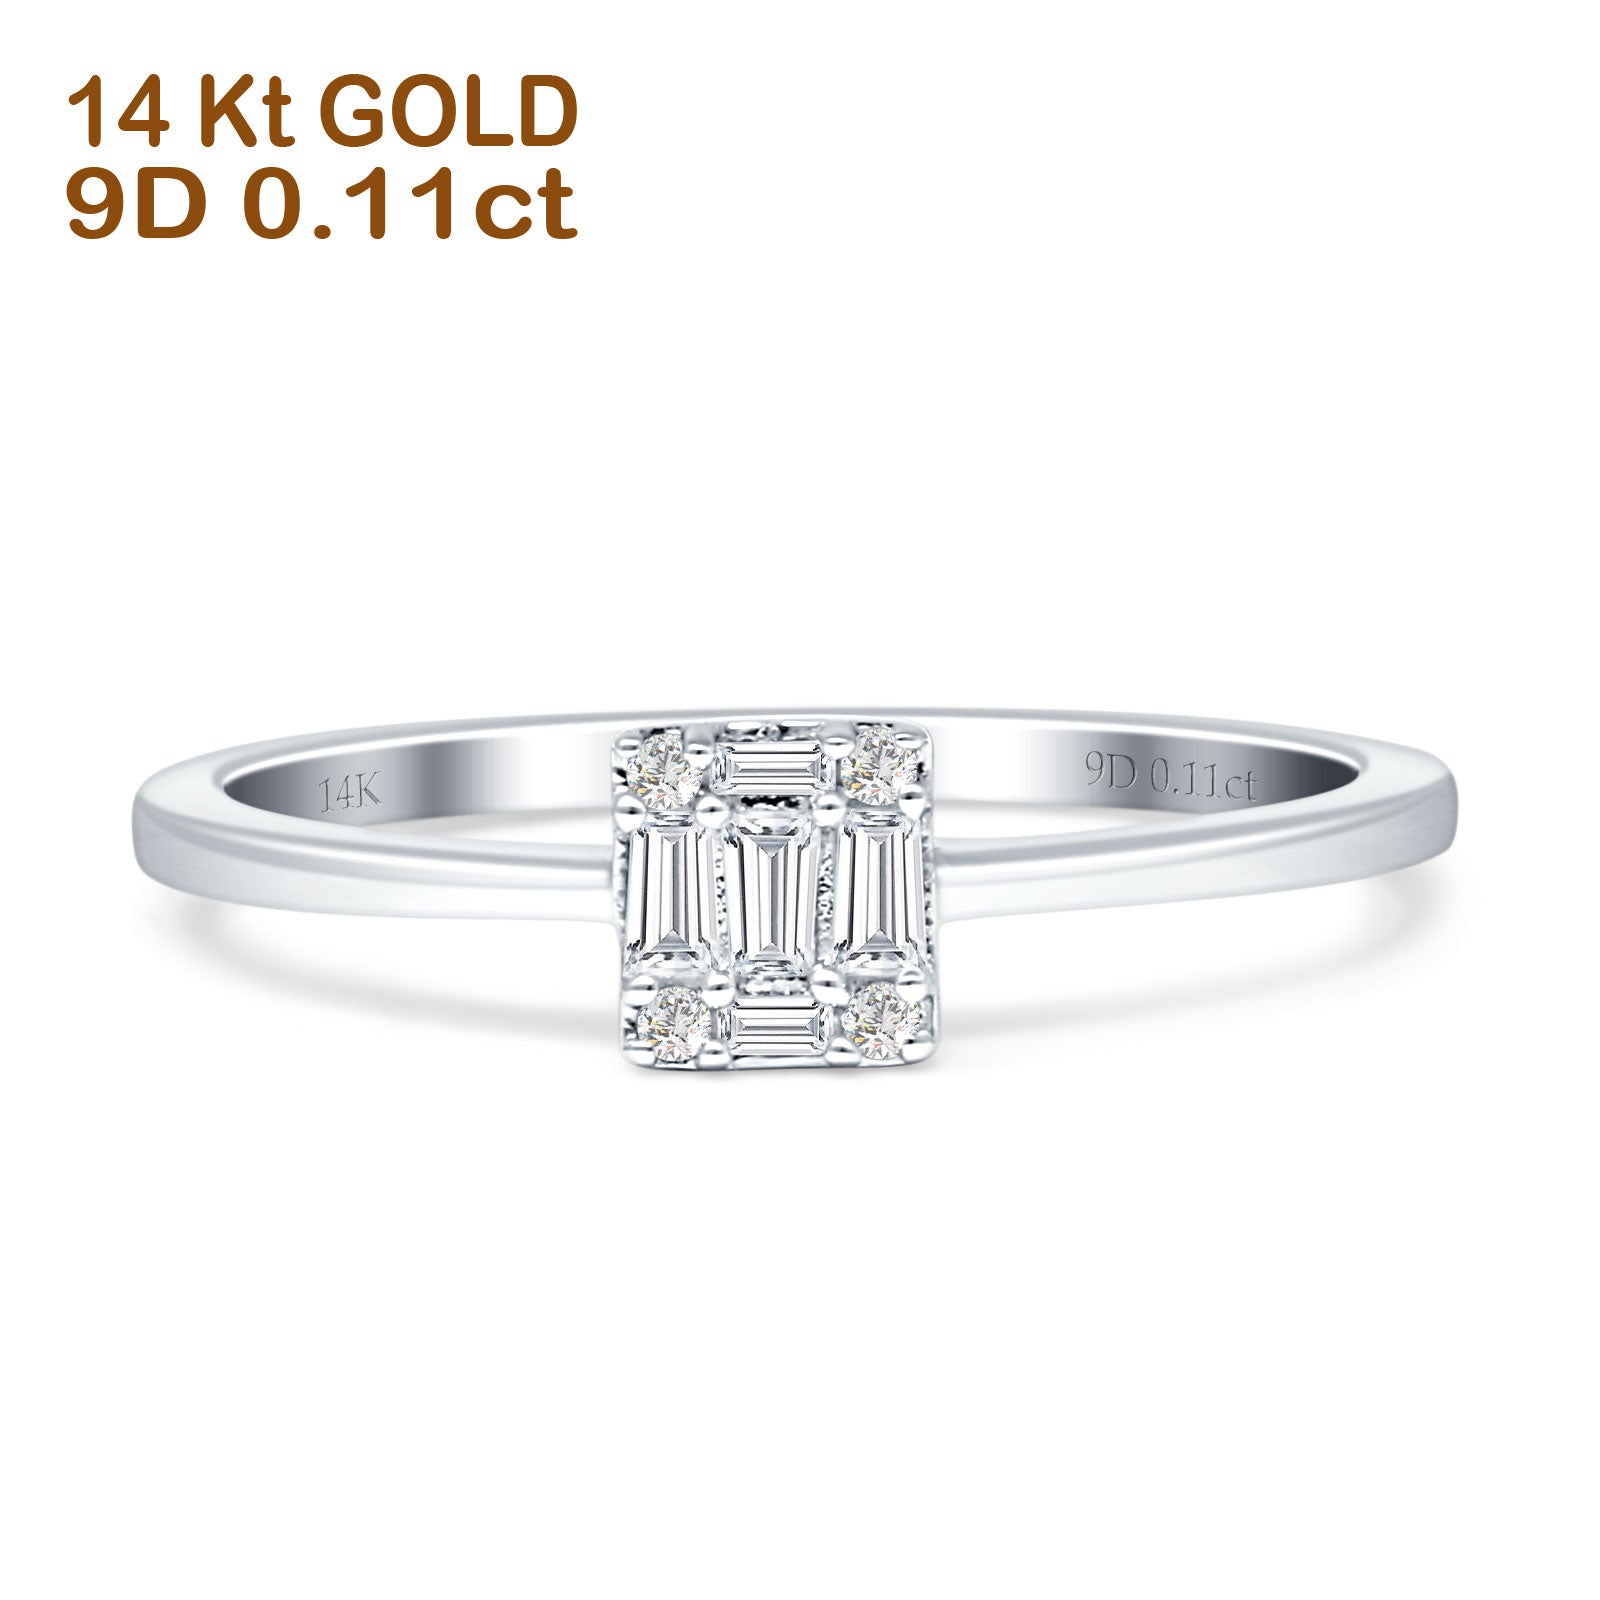 Unique Round And Baguette Diamond Ring 14K Gold 0.11ct